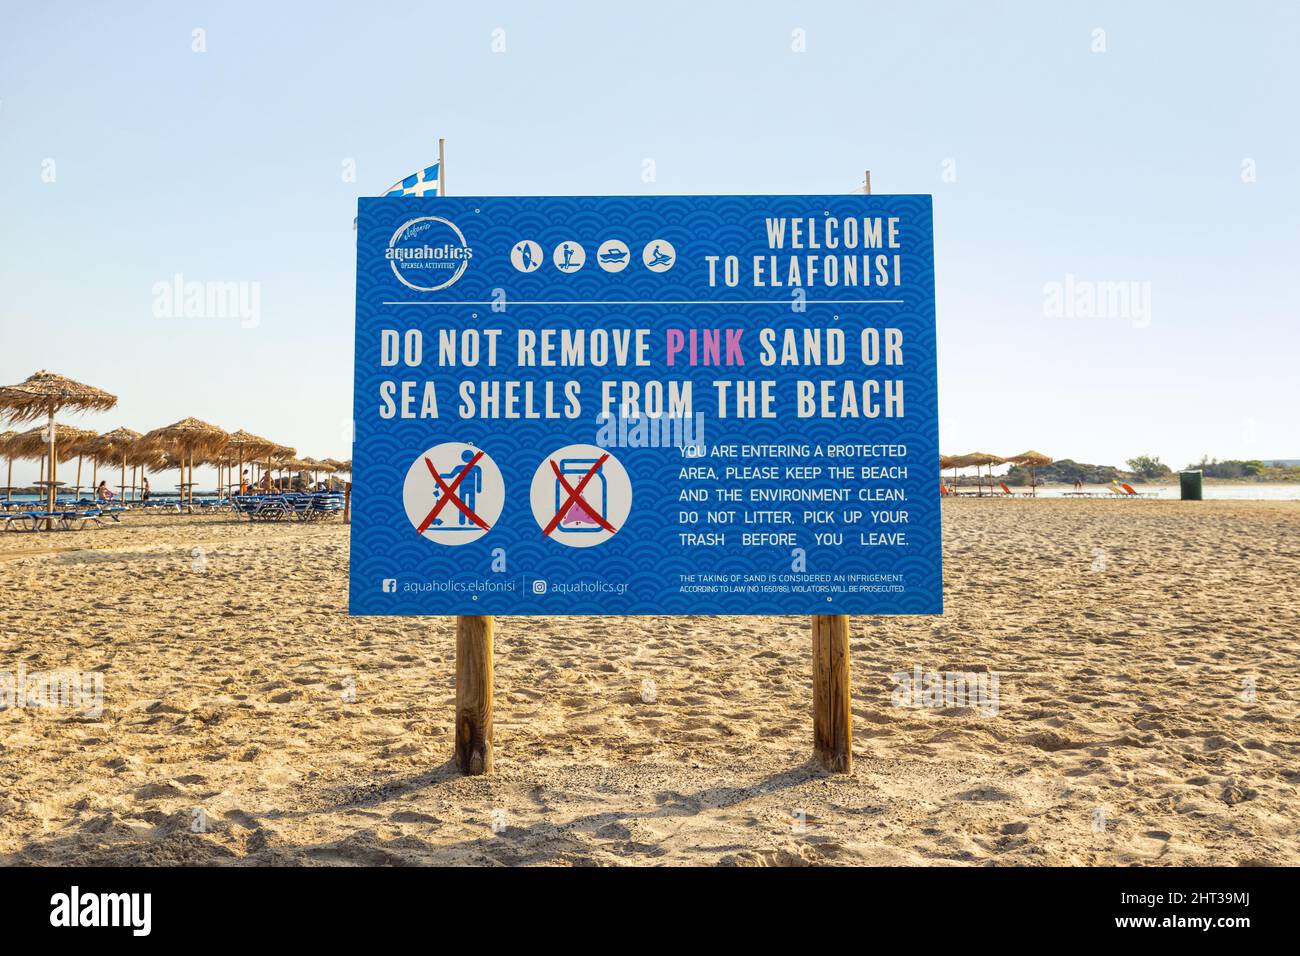 Kissamos, Greece - June 21st 2021: Sign for tourists on the Elafonissi beach, informing them that removing the pink sand and shells is forbidden Stock Photo